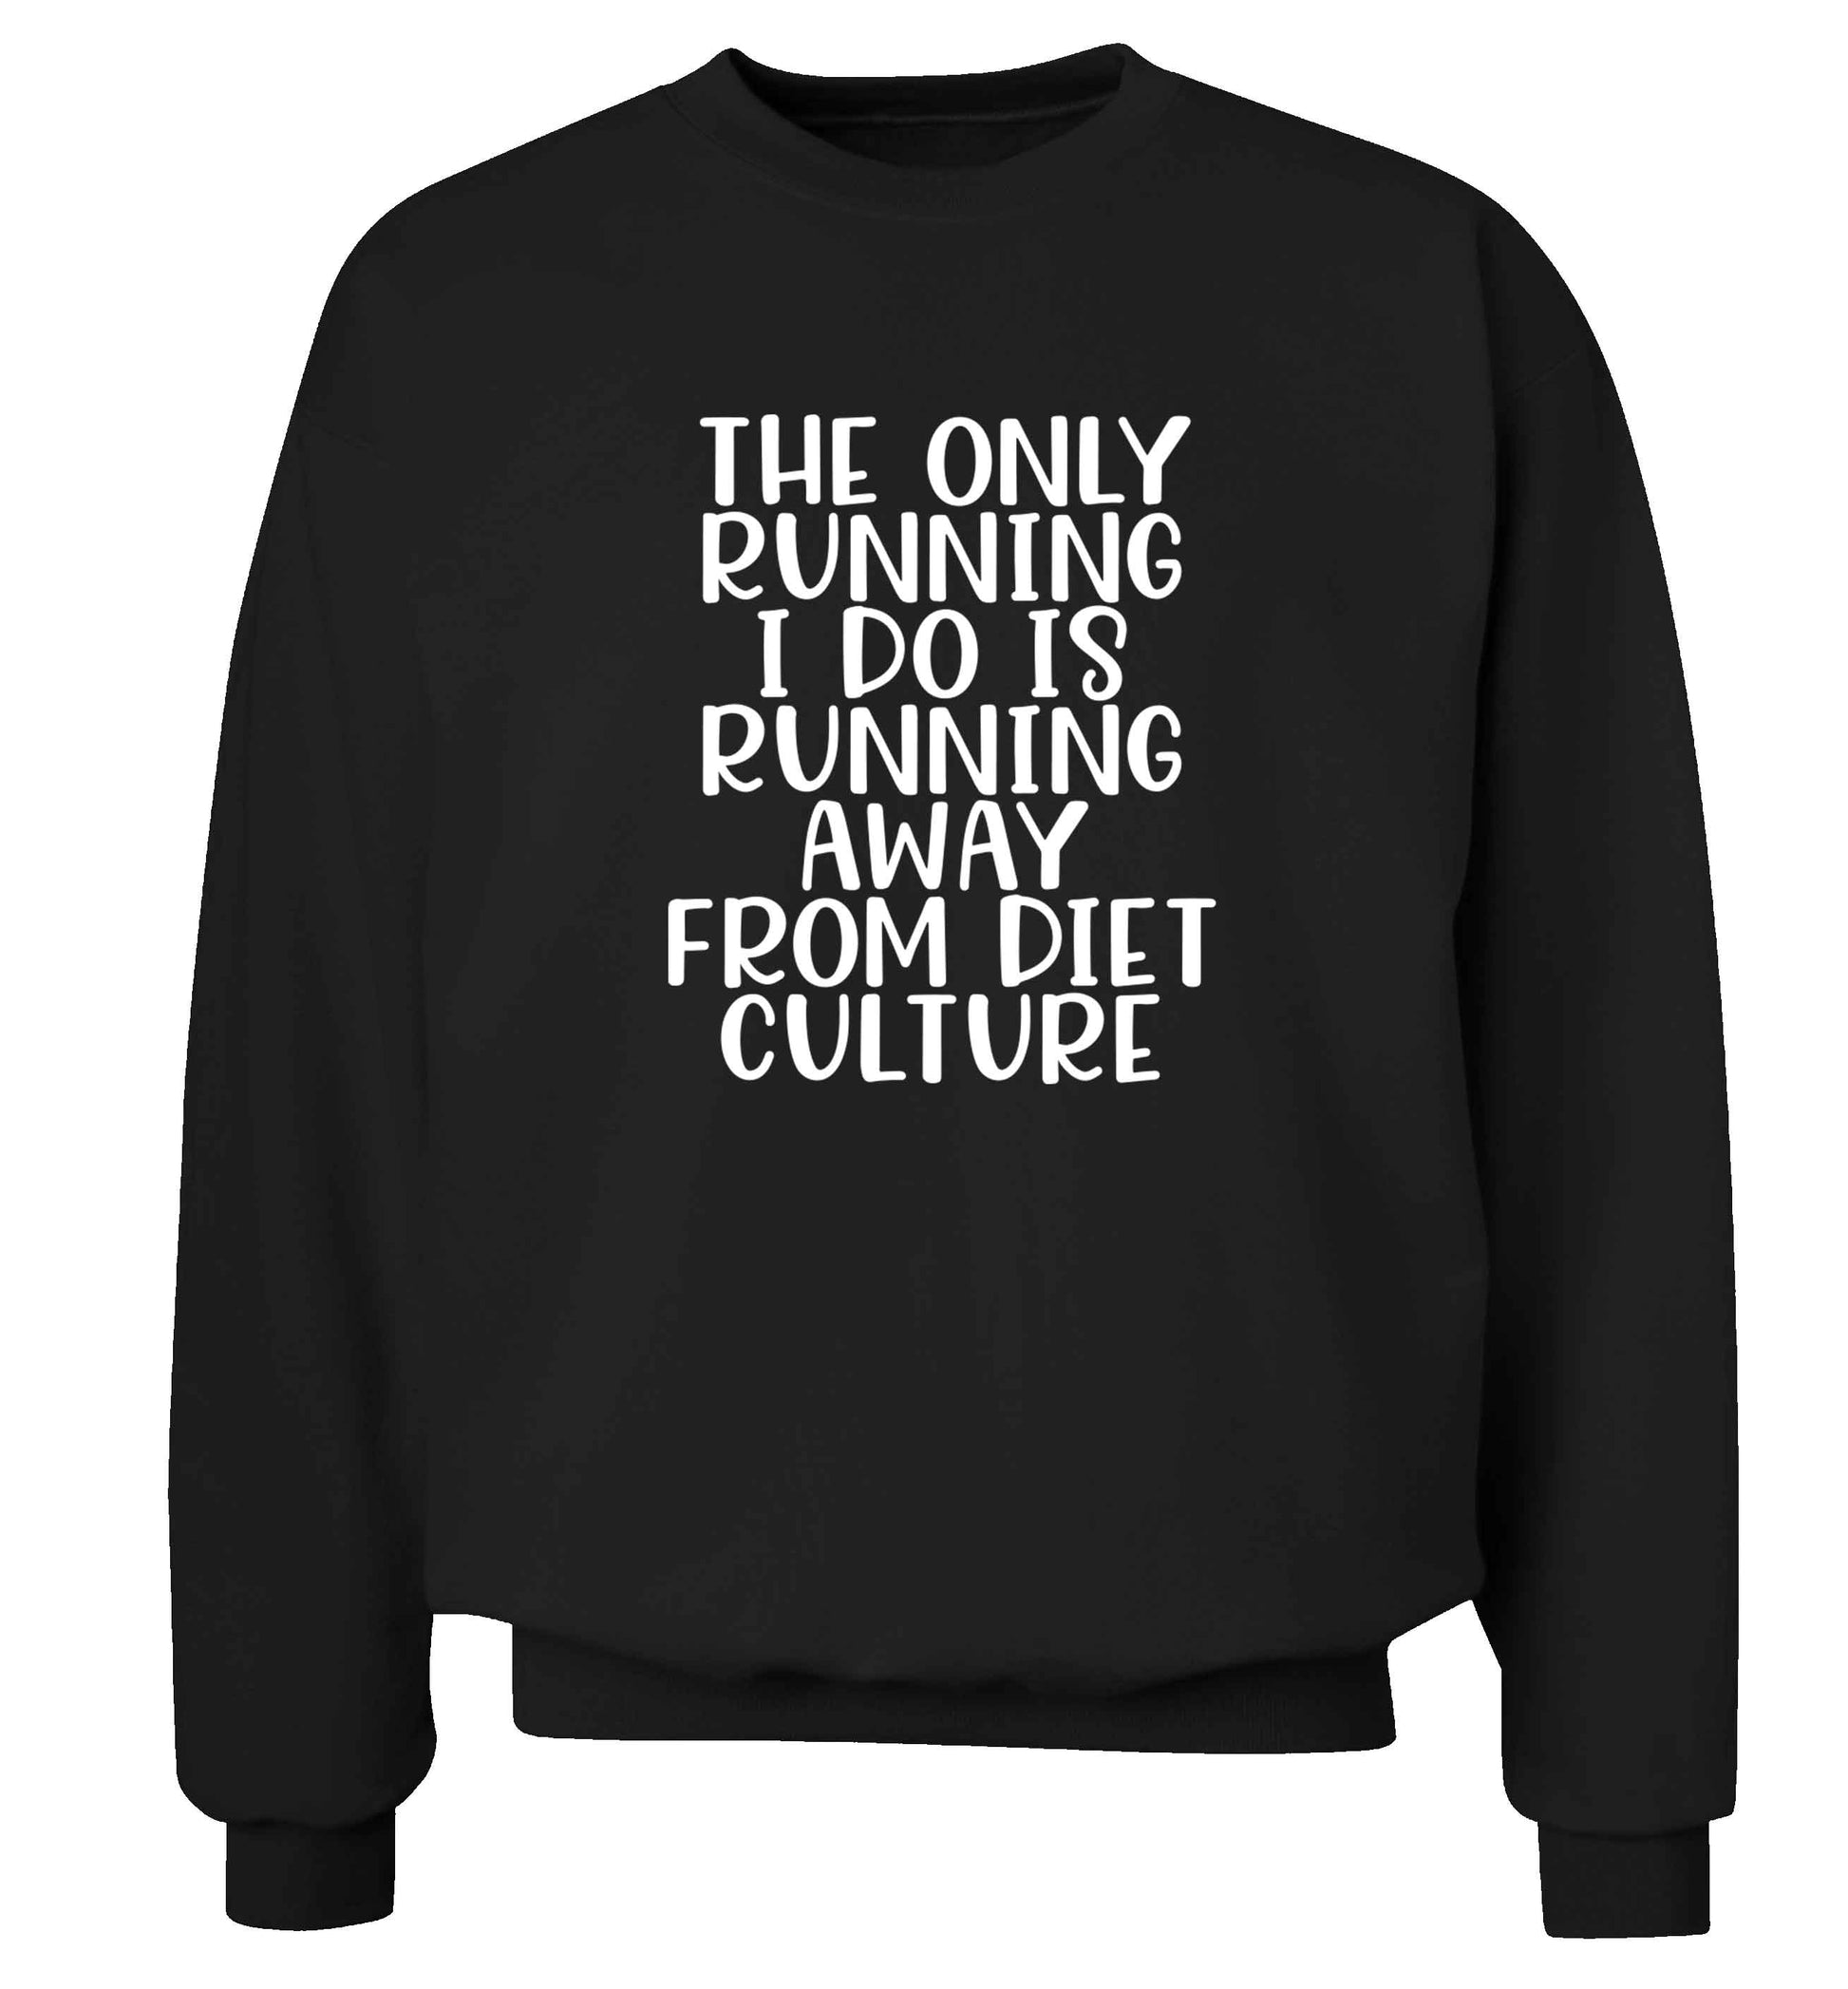 The only running I do is running away from diet culture adult's unisex black sweater 2XL